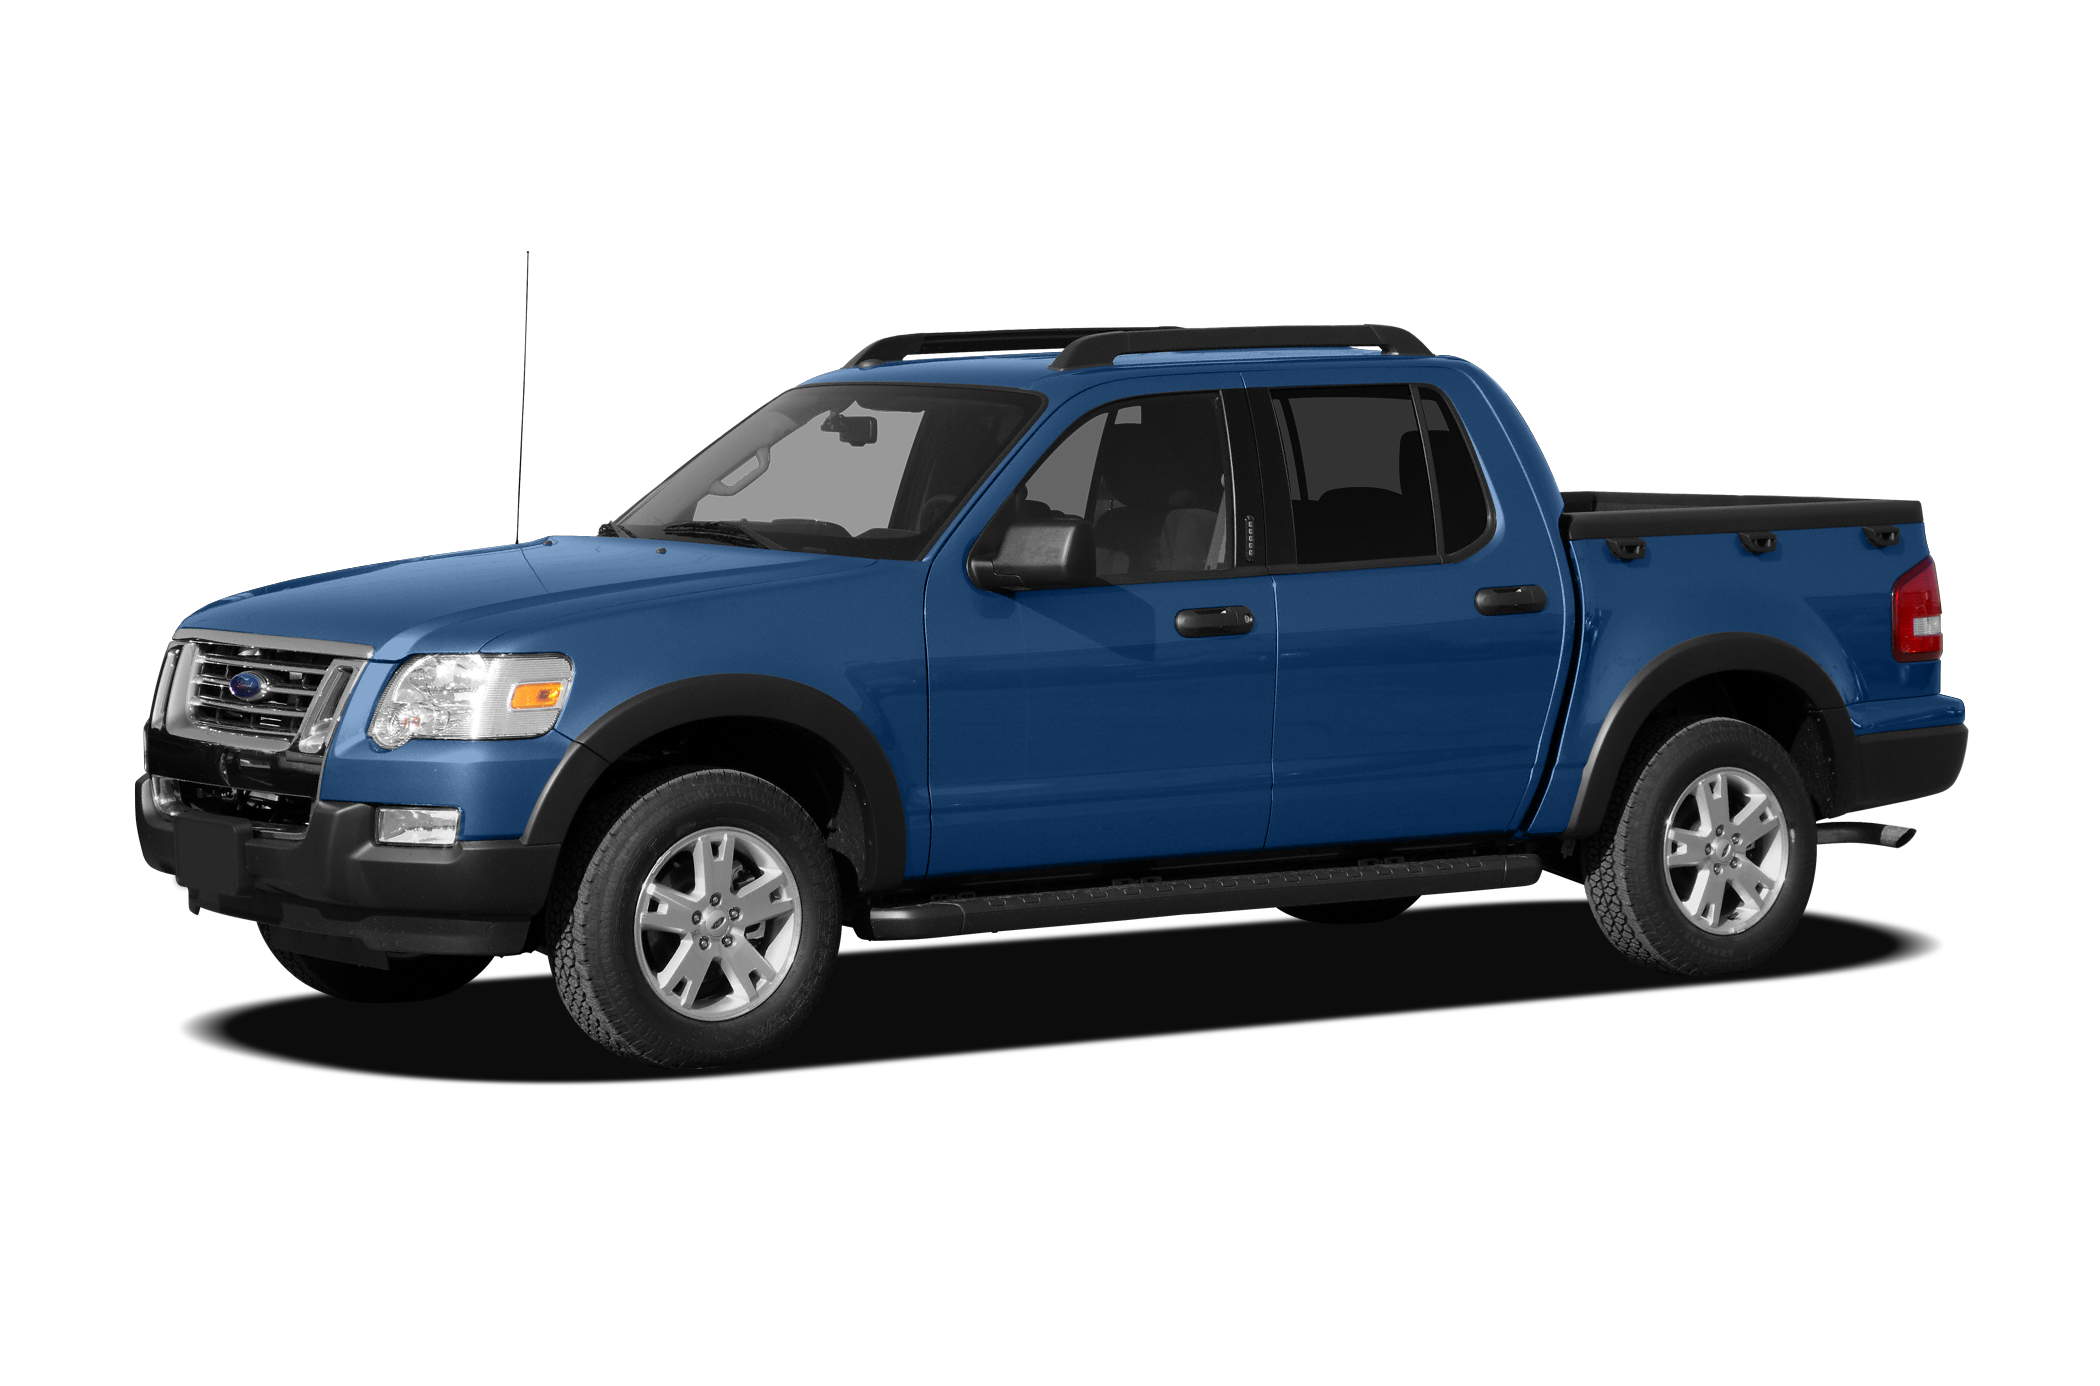 2009 Ford Explorer Sport Trac View Specs, Prices